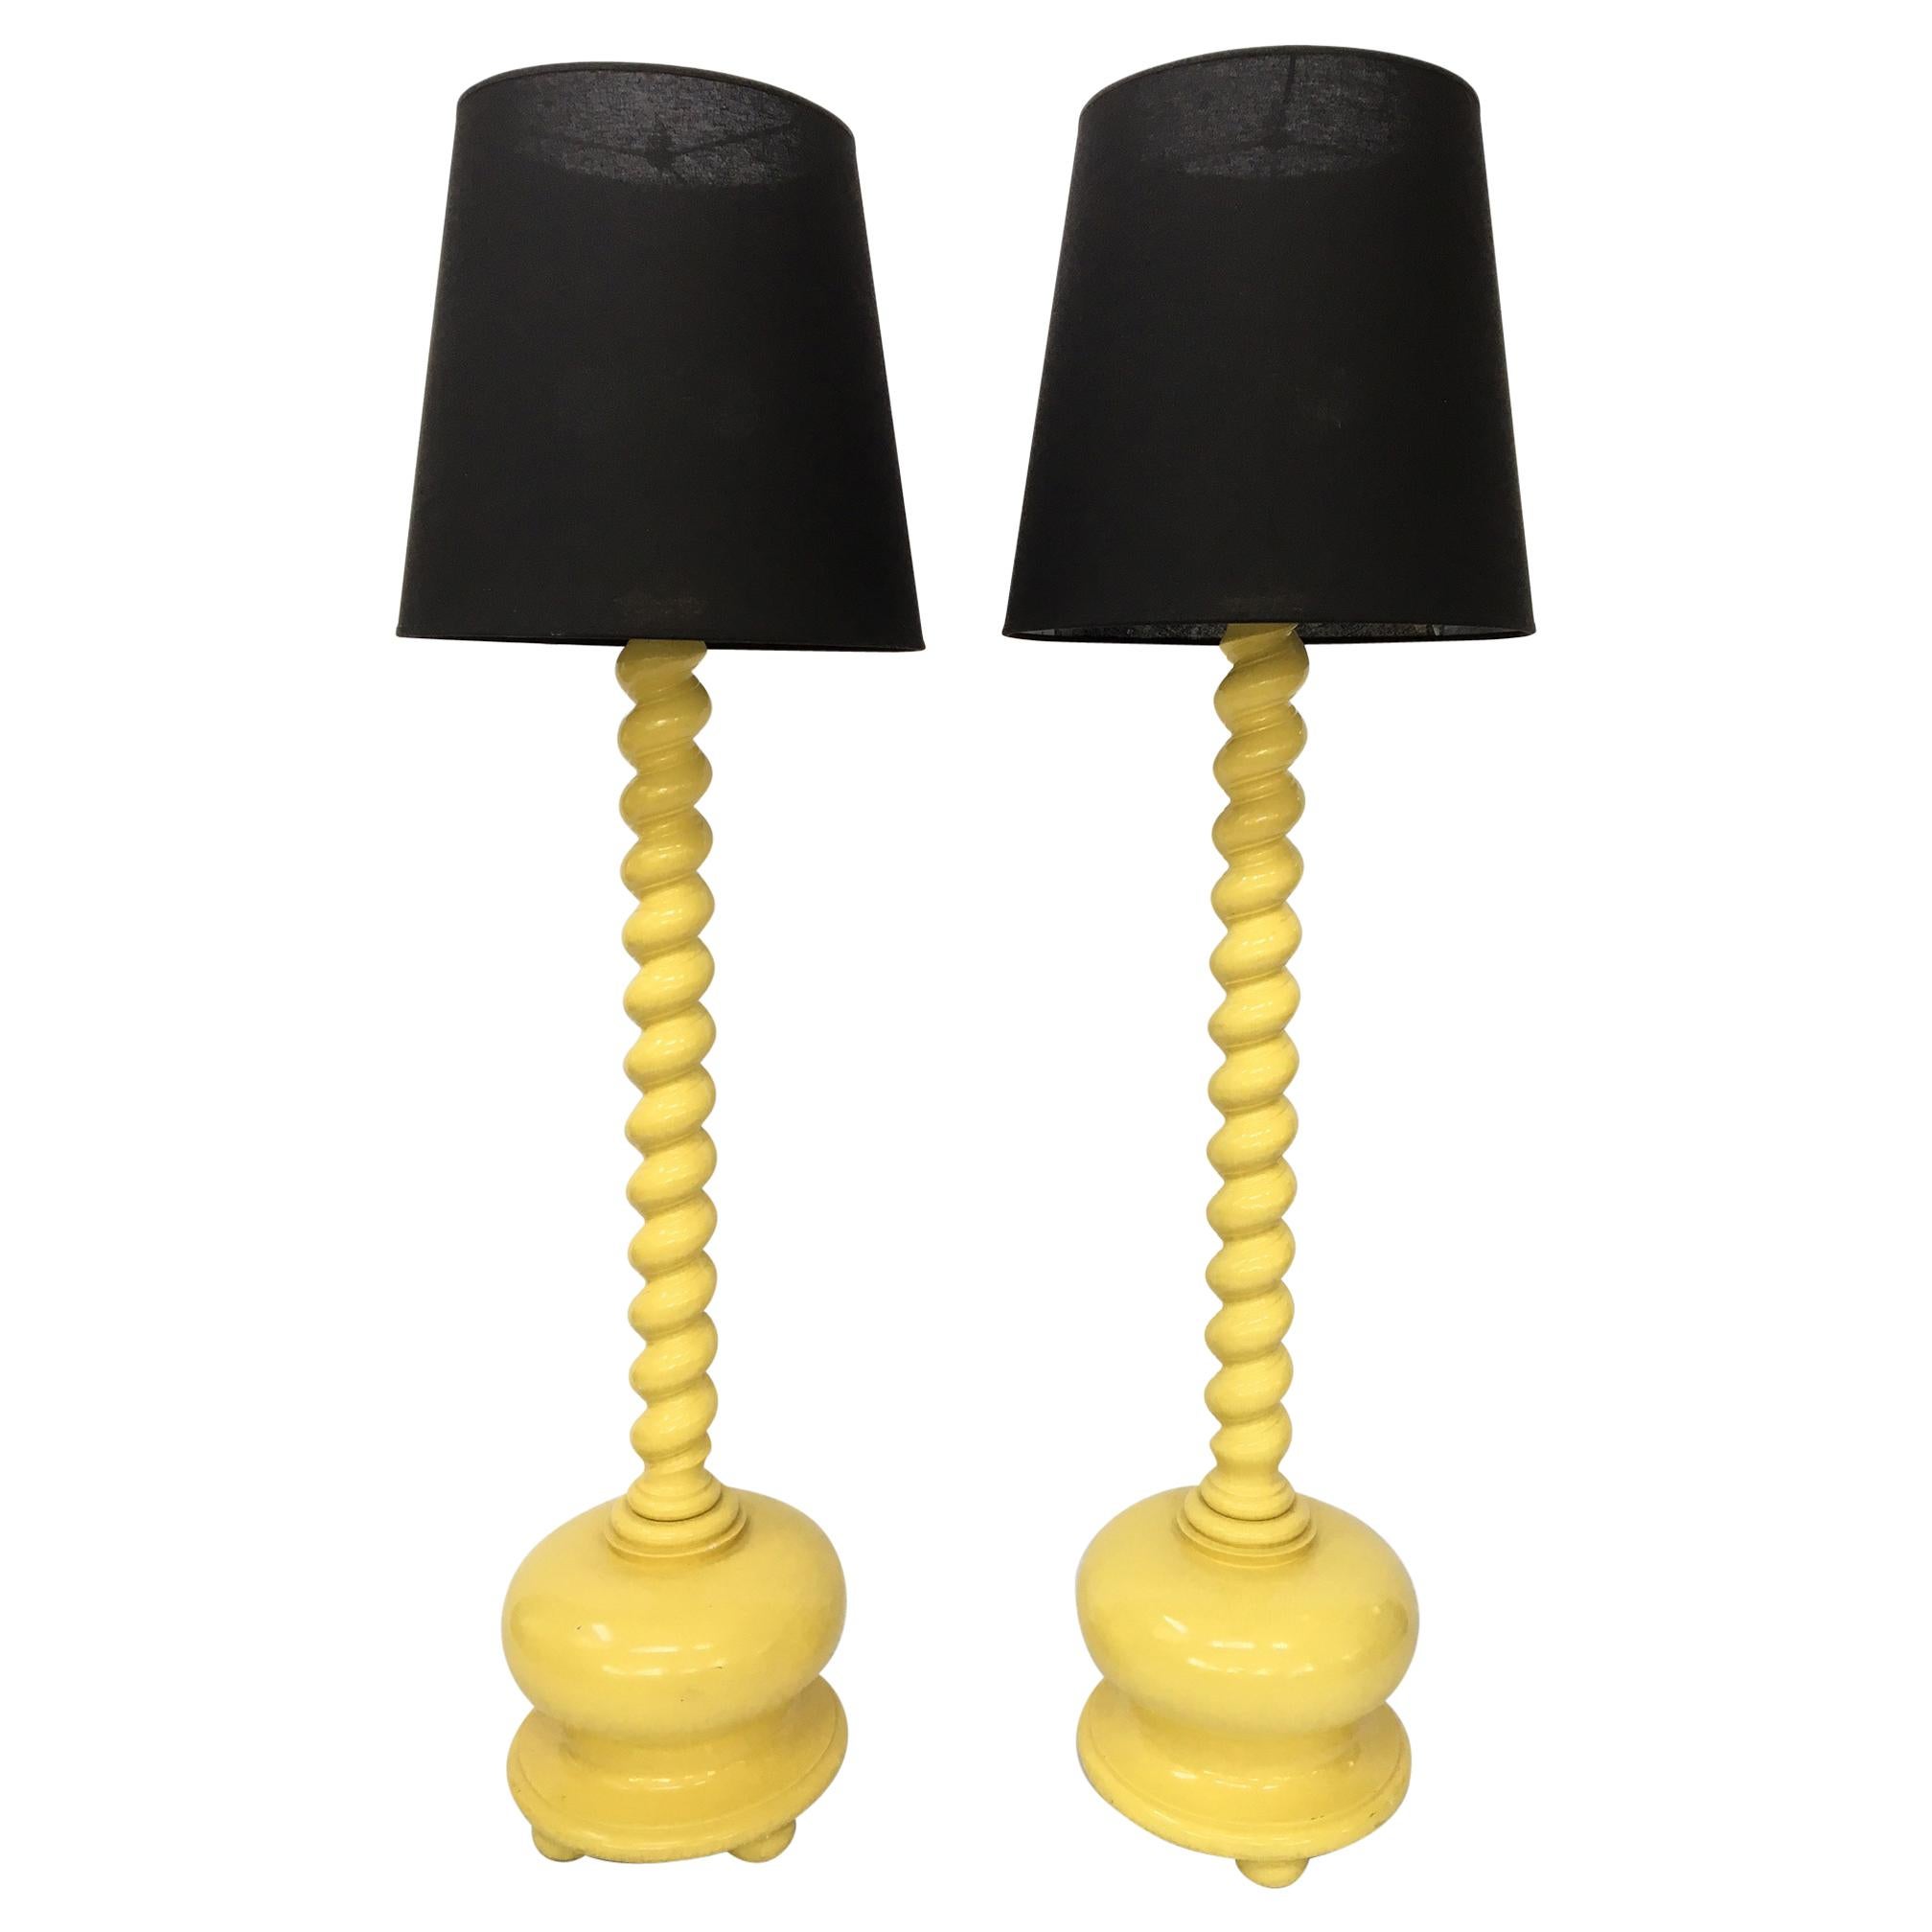 Pair of Yellow Spiral Twist Carved Wood Floor Lamps